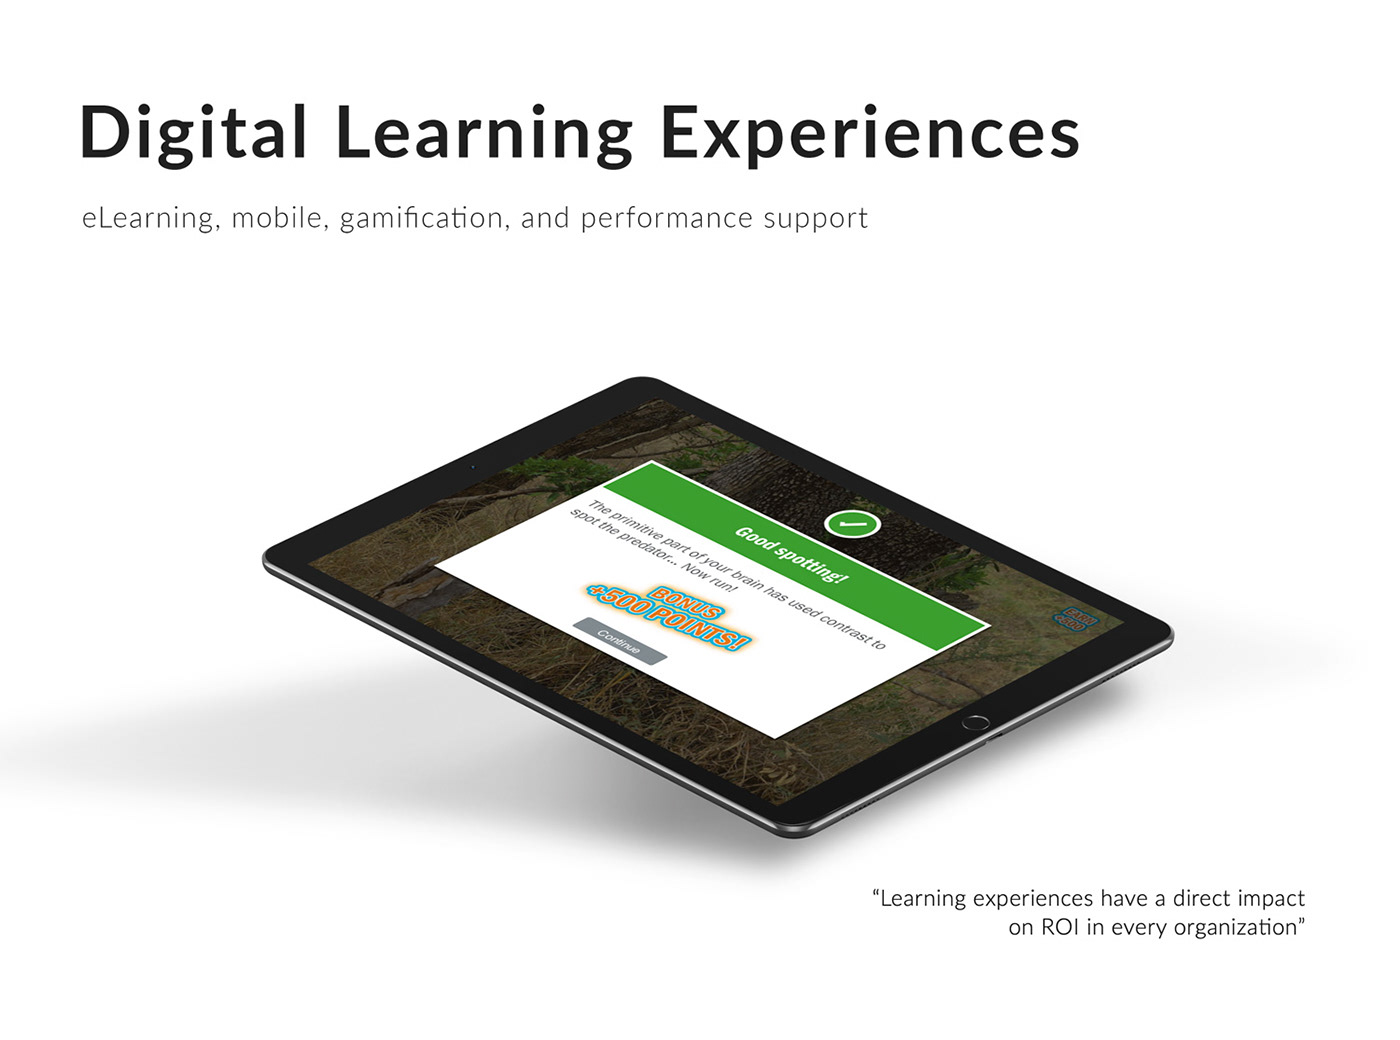 eLearning Digital Learning mobile learning performance support Micro Learning Blended Learning Instructional Design learning design adult learning